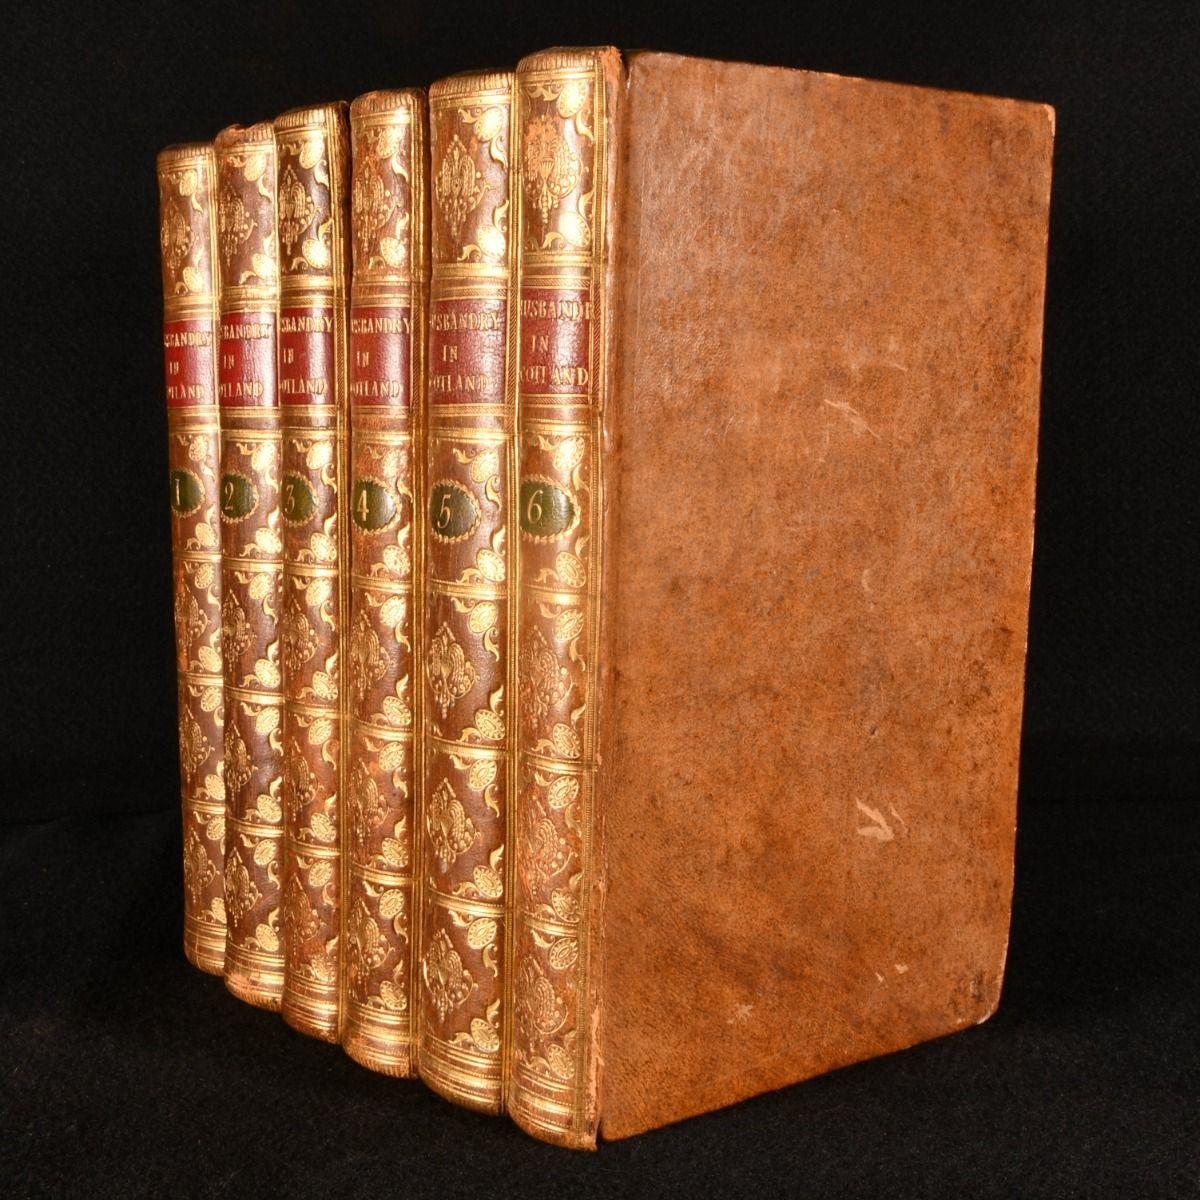 A scarce six volume collection regarding agriculture in Scotland during the eighteenth century, with delightful gilt spines.

ESTC Citation No. T103102.

This work examines agriculture, relating to the management of resources, cultivation of crops